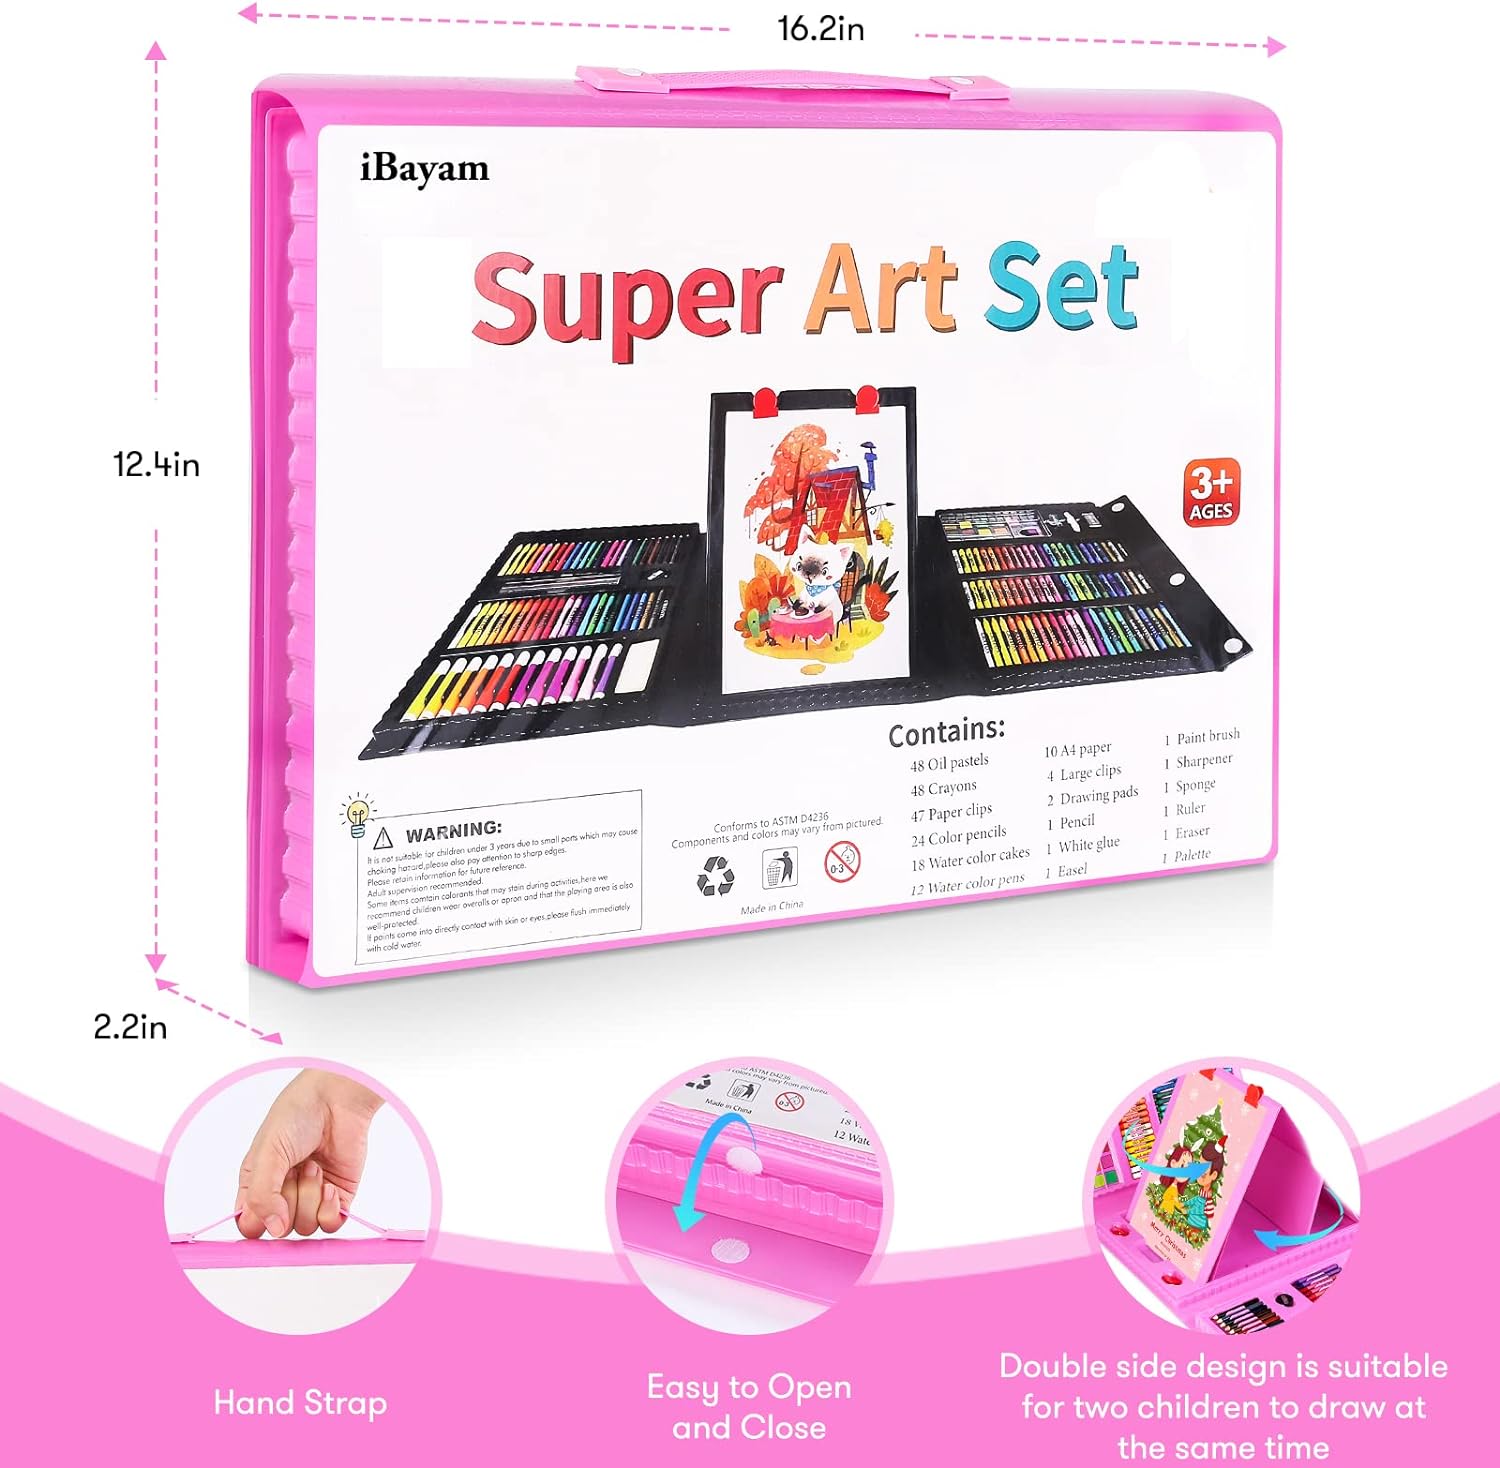 iBayam Art Kit, 251-Pack Art Supplies Drawing Kits, Arts and Crafts Gifts Box for Kids Teen Girls Boys, Art Set Case with Trifold Easel, Scratch Paper, Sketch Pad, Coloring Book, Crayons, Pencils